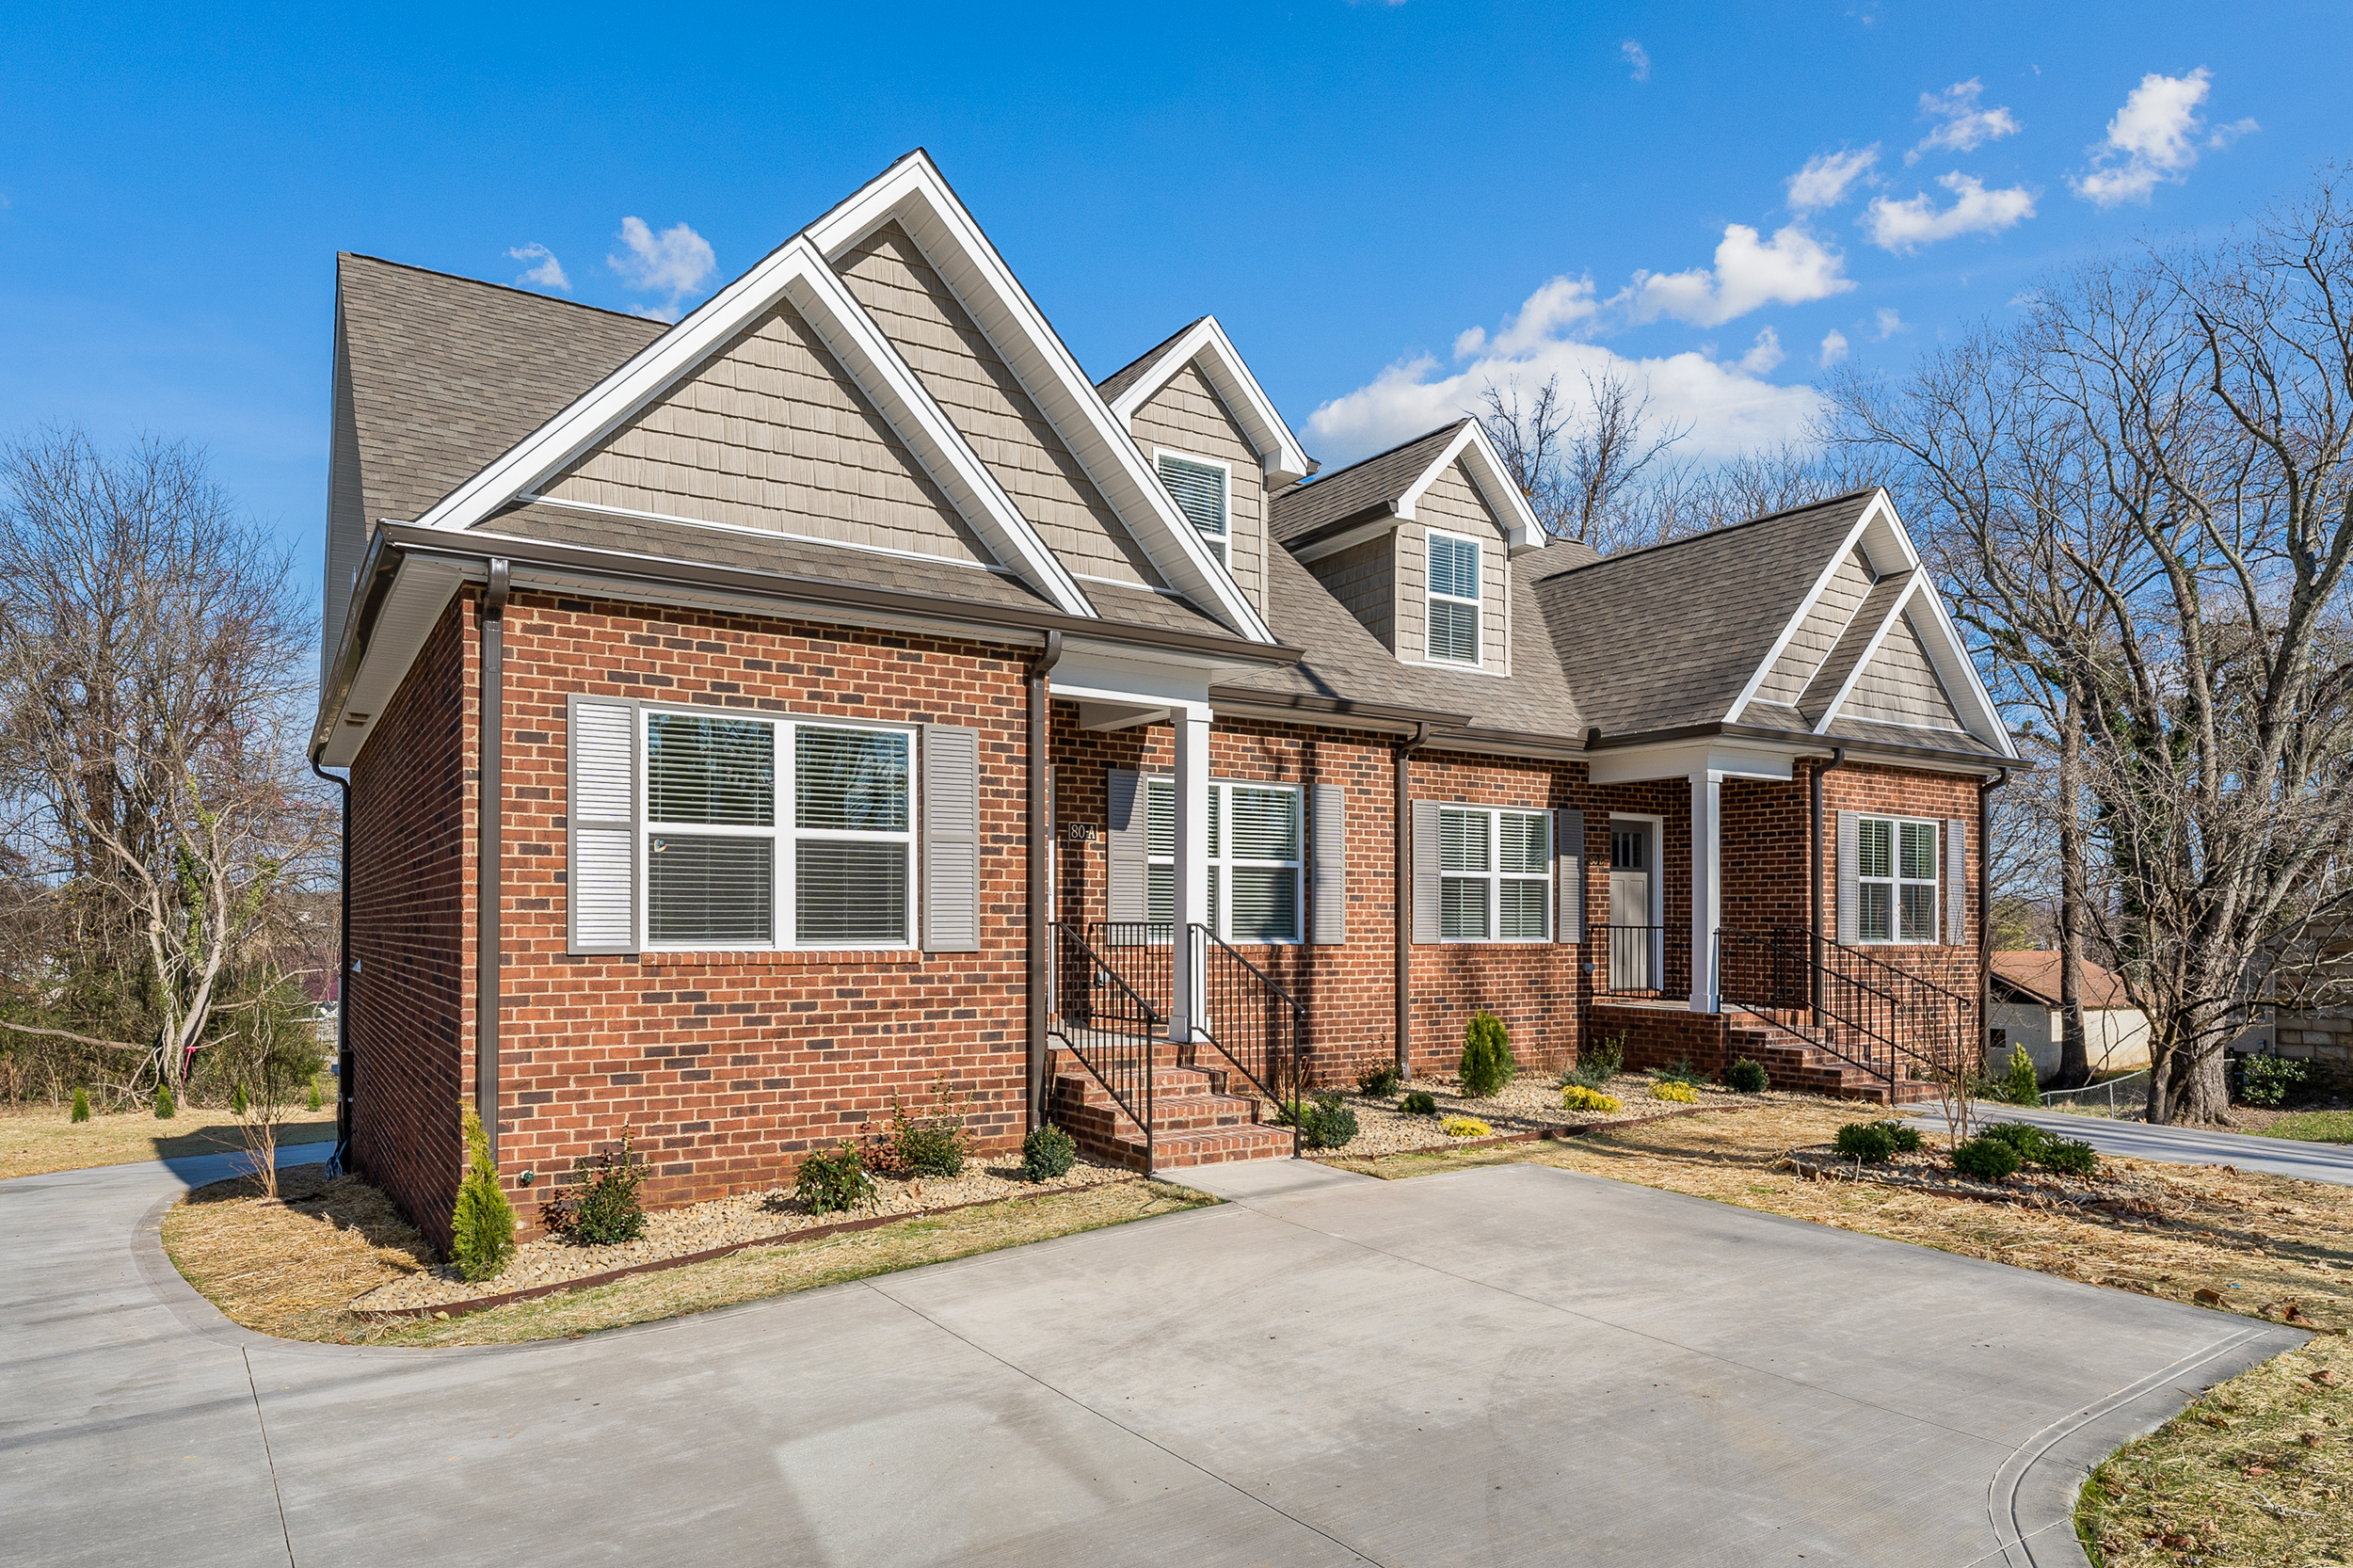 Town Home Apartment Rentals in Cookeville